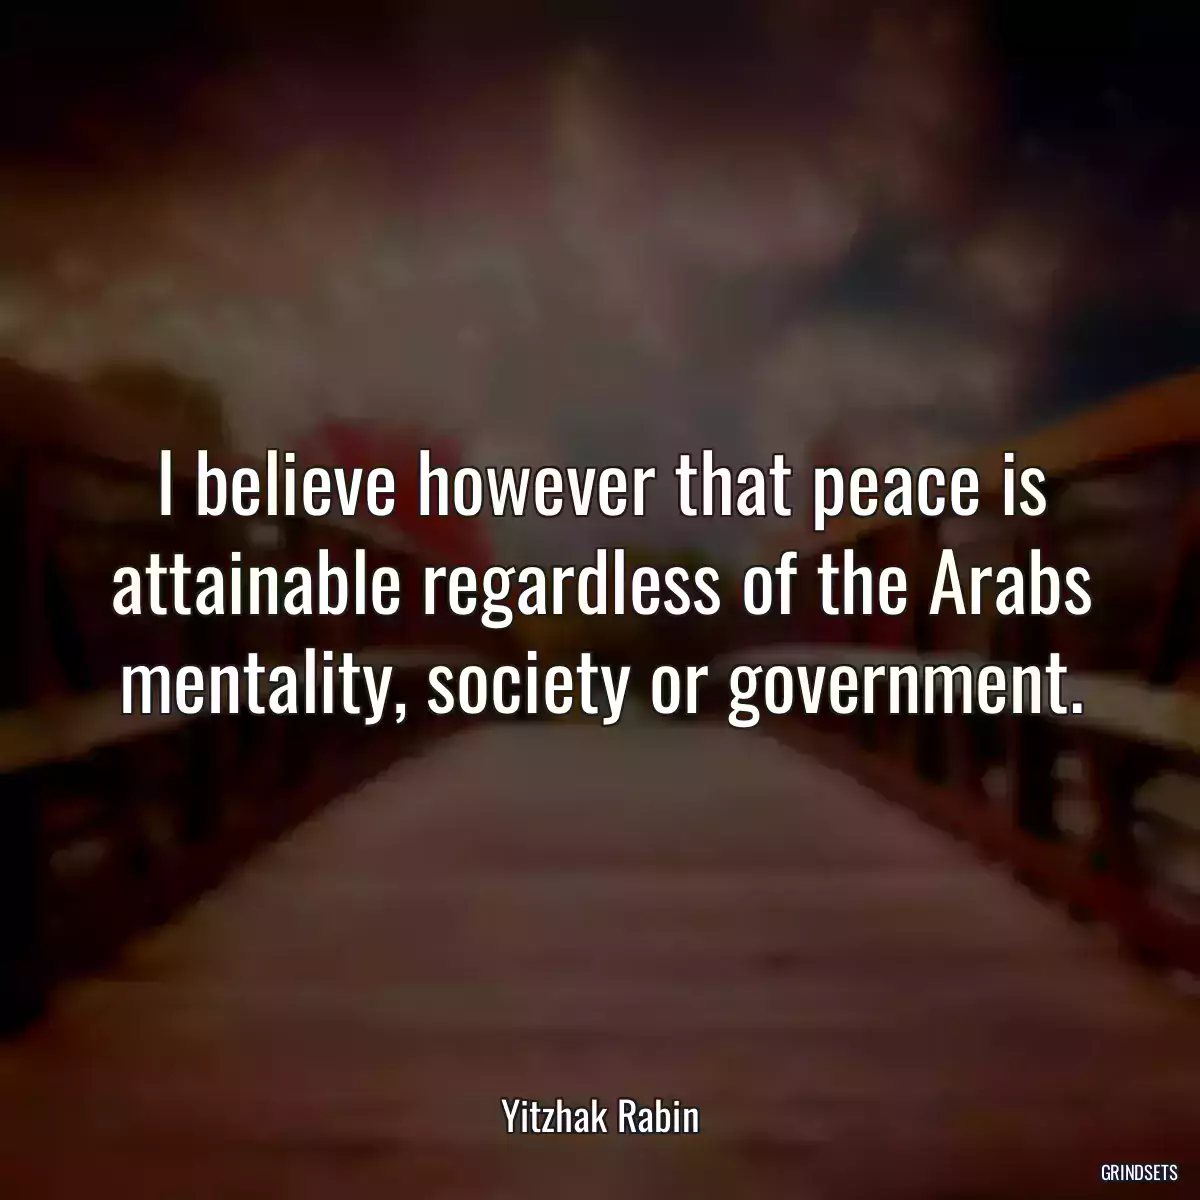 I believe however that peace is attainable regardless of the Arabs mentality, society or government.